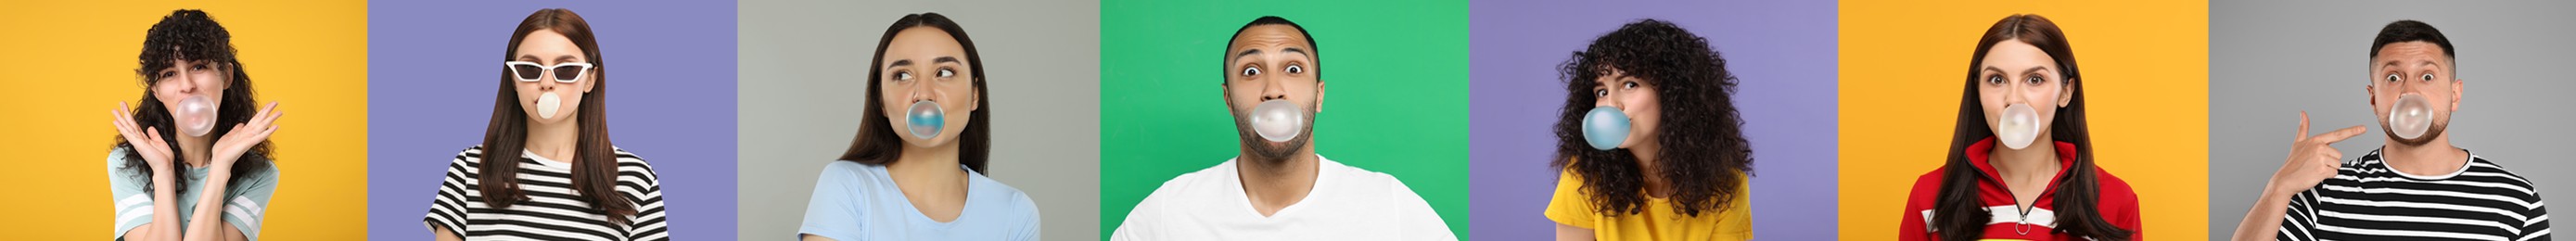 Image of People blowing bubble gums on color backgrounds, set of photos